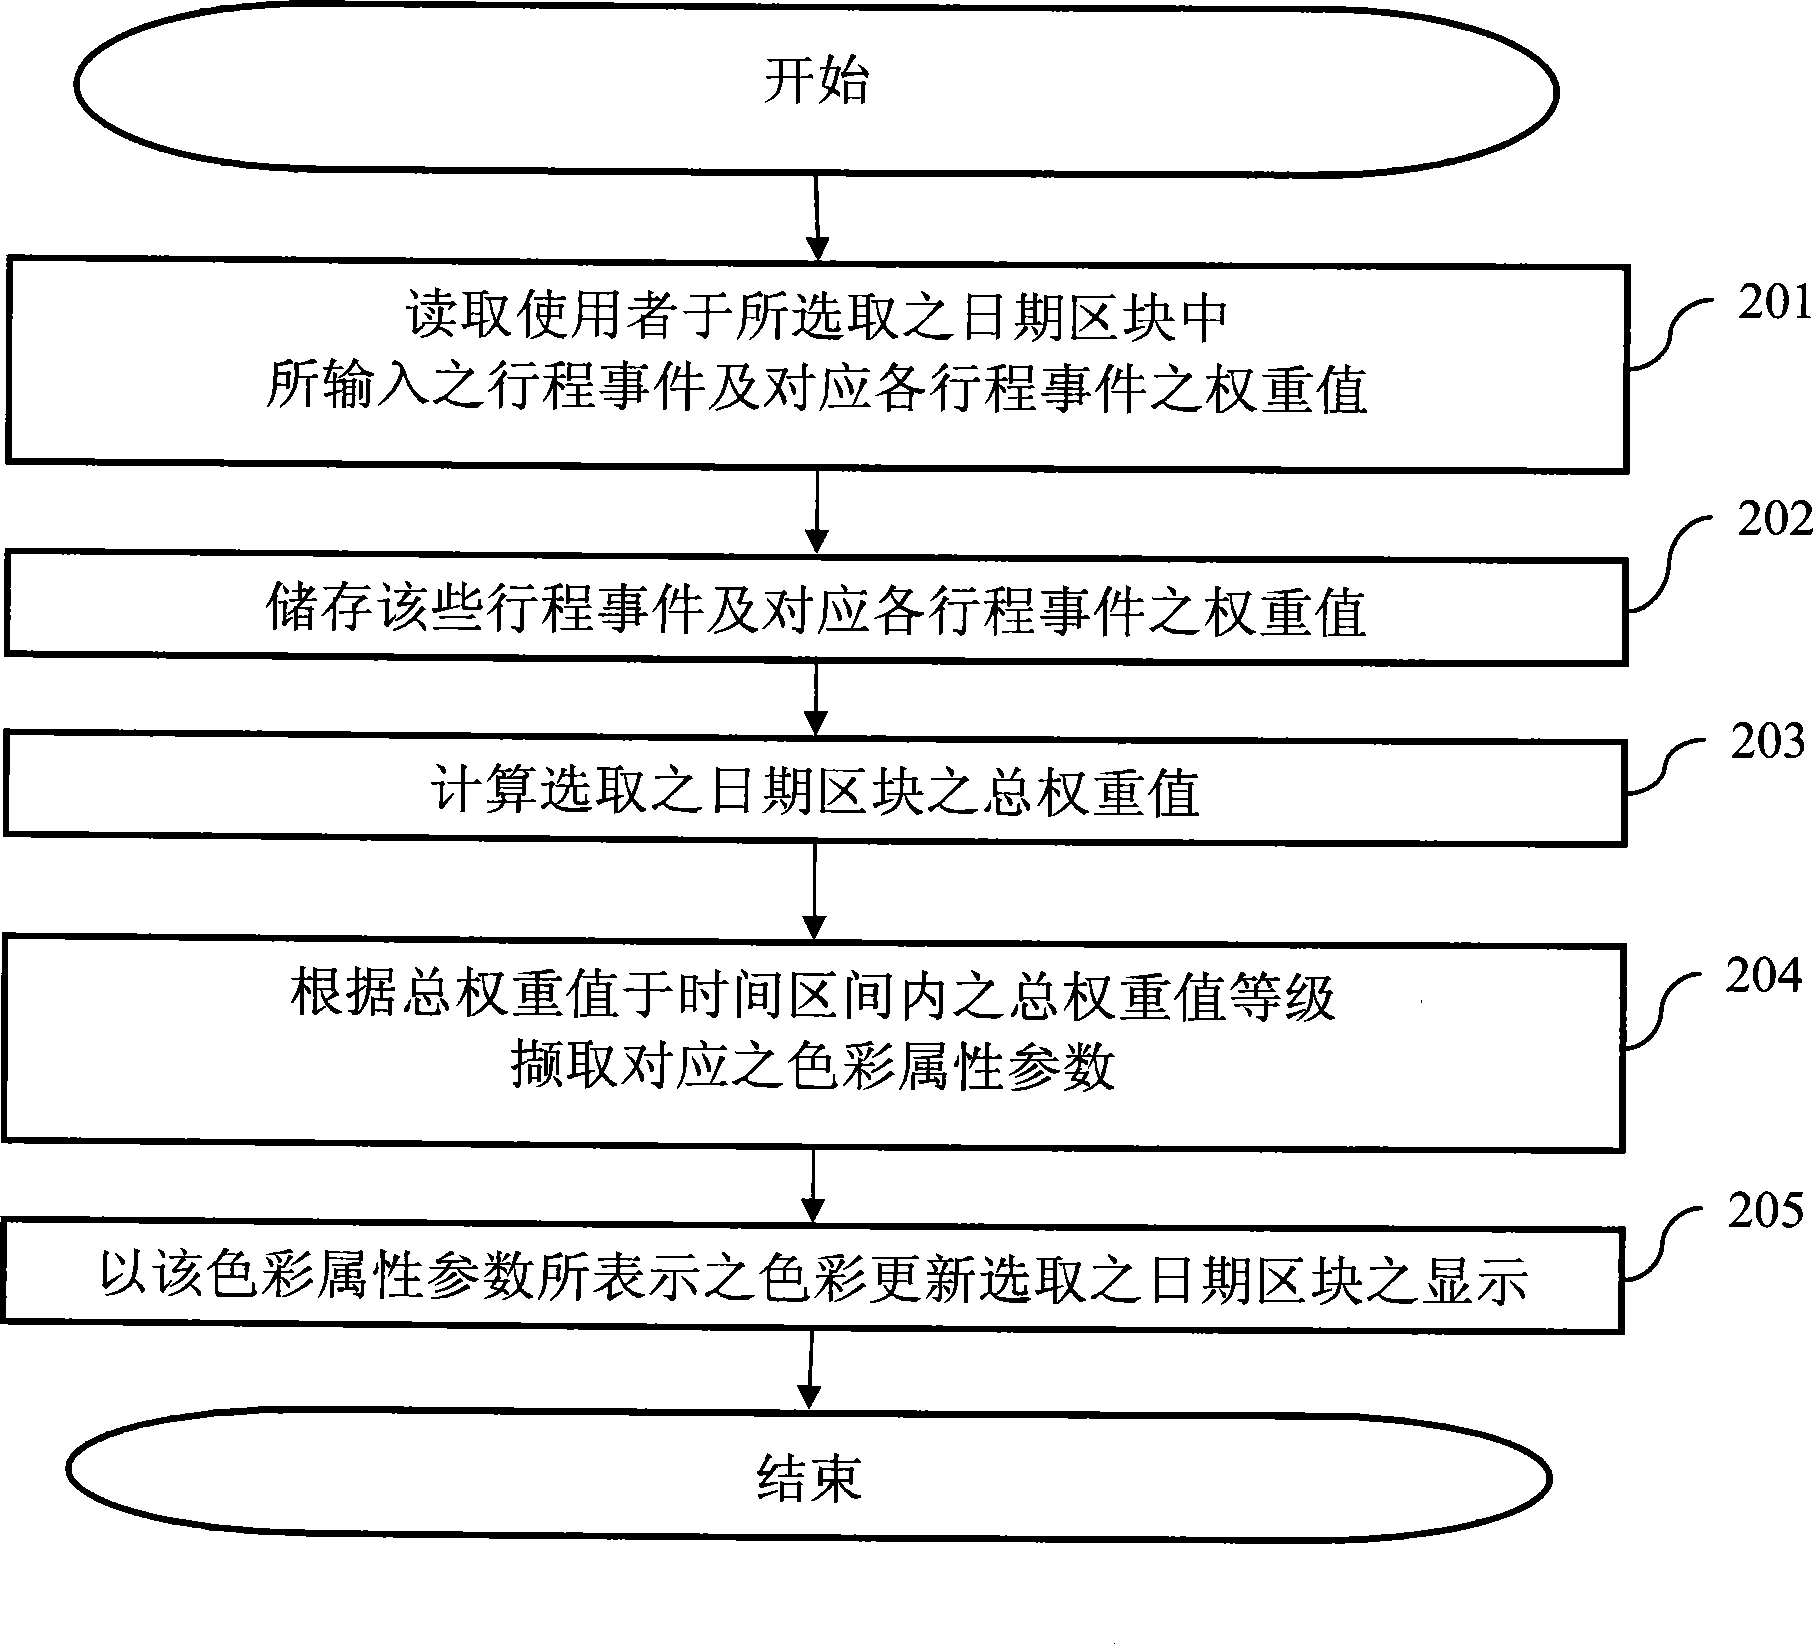 Electronic programme arrangement system and method with color cuing display